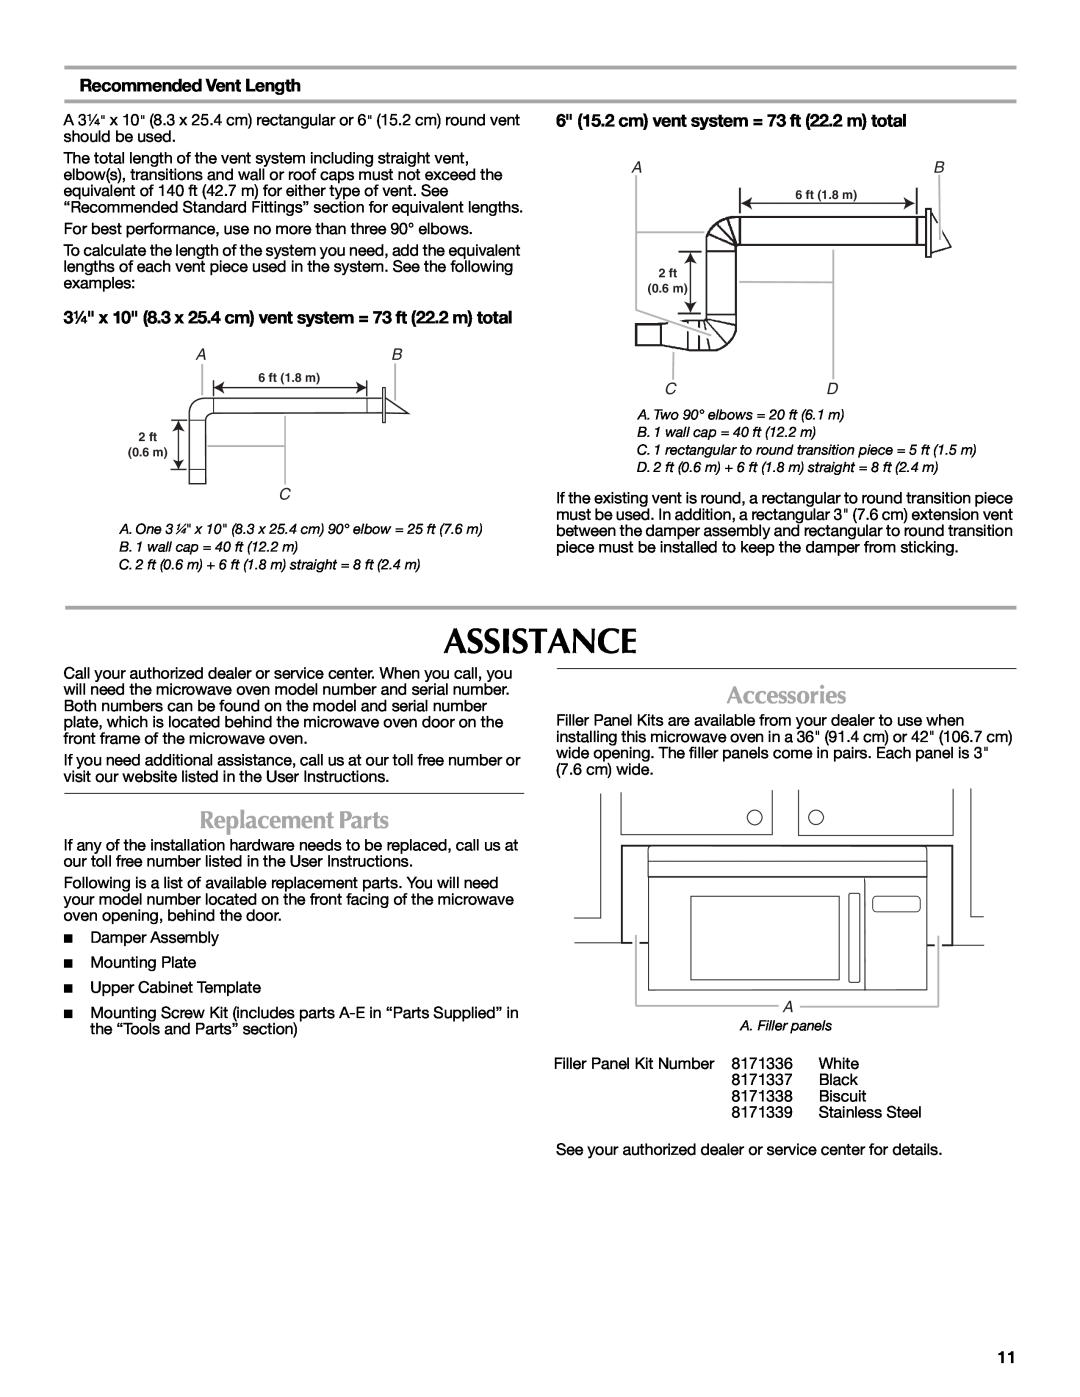 Maytag W10188947A, W10188238A installation instructions Assistance, Accessories, Replacement Parts, Recommended Vent Length 